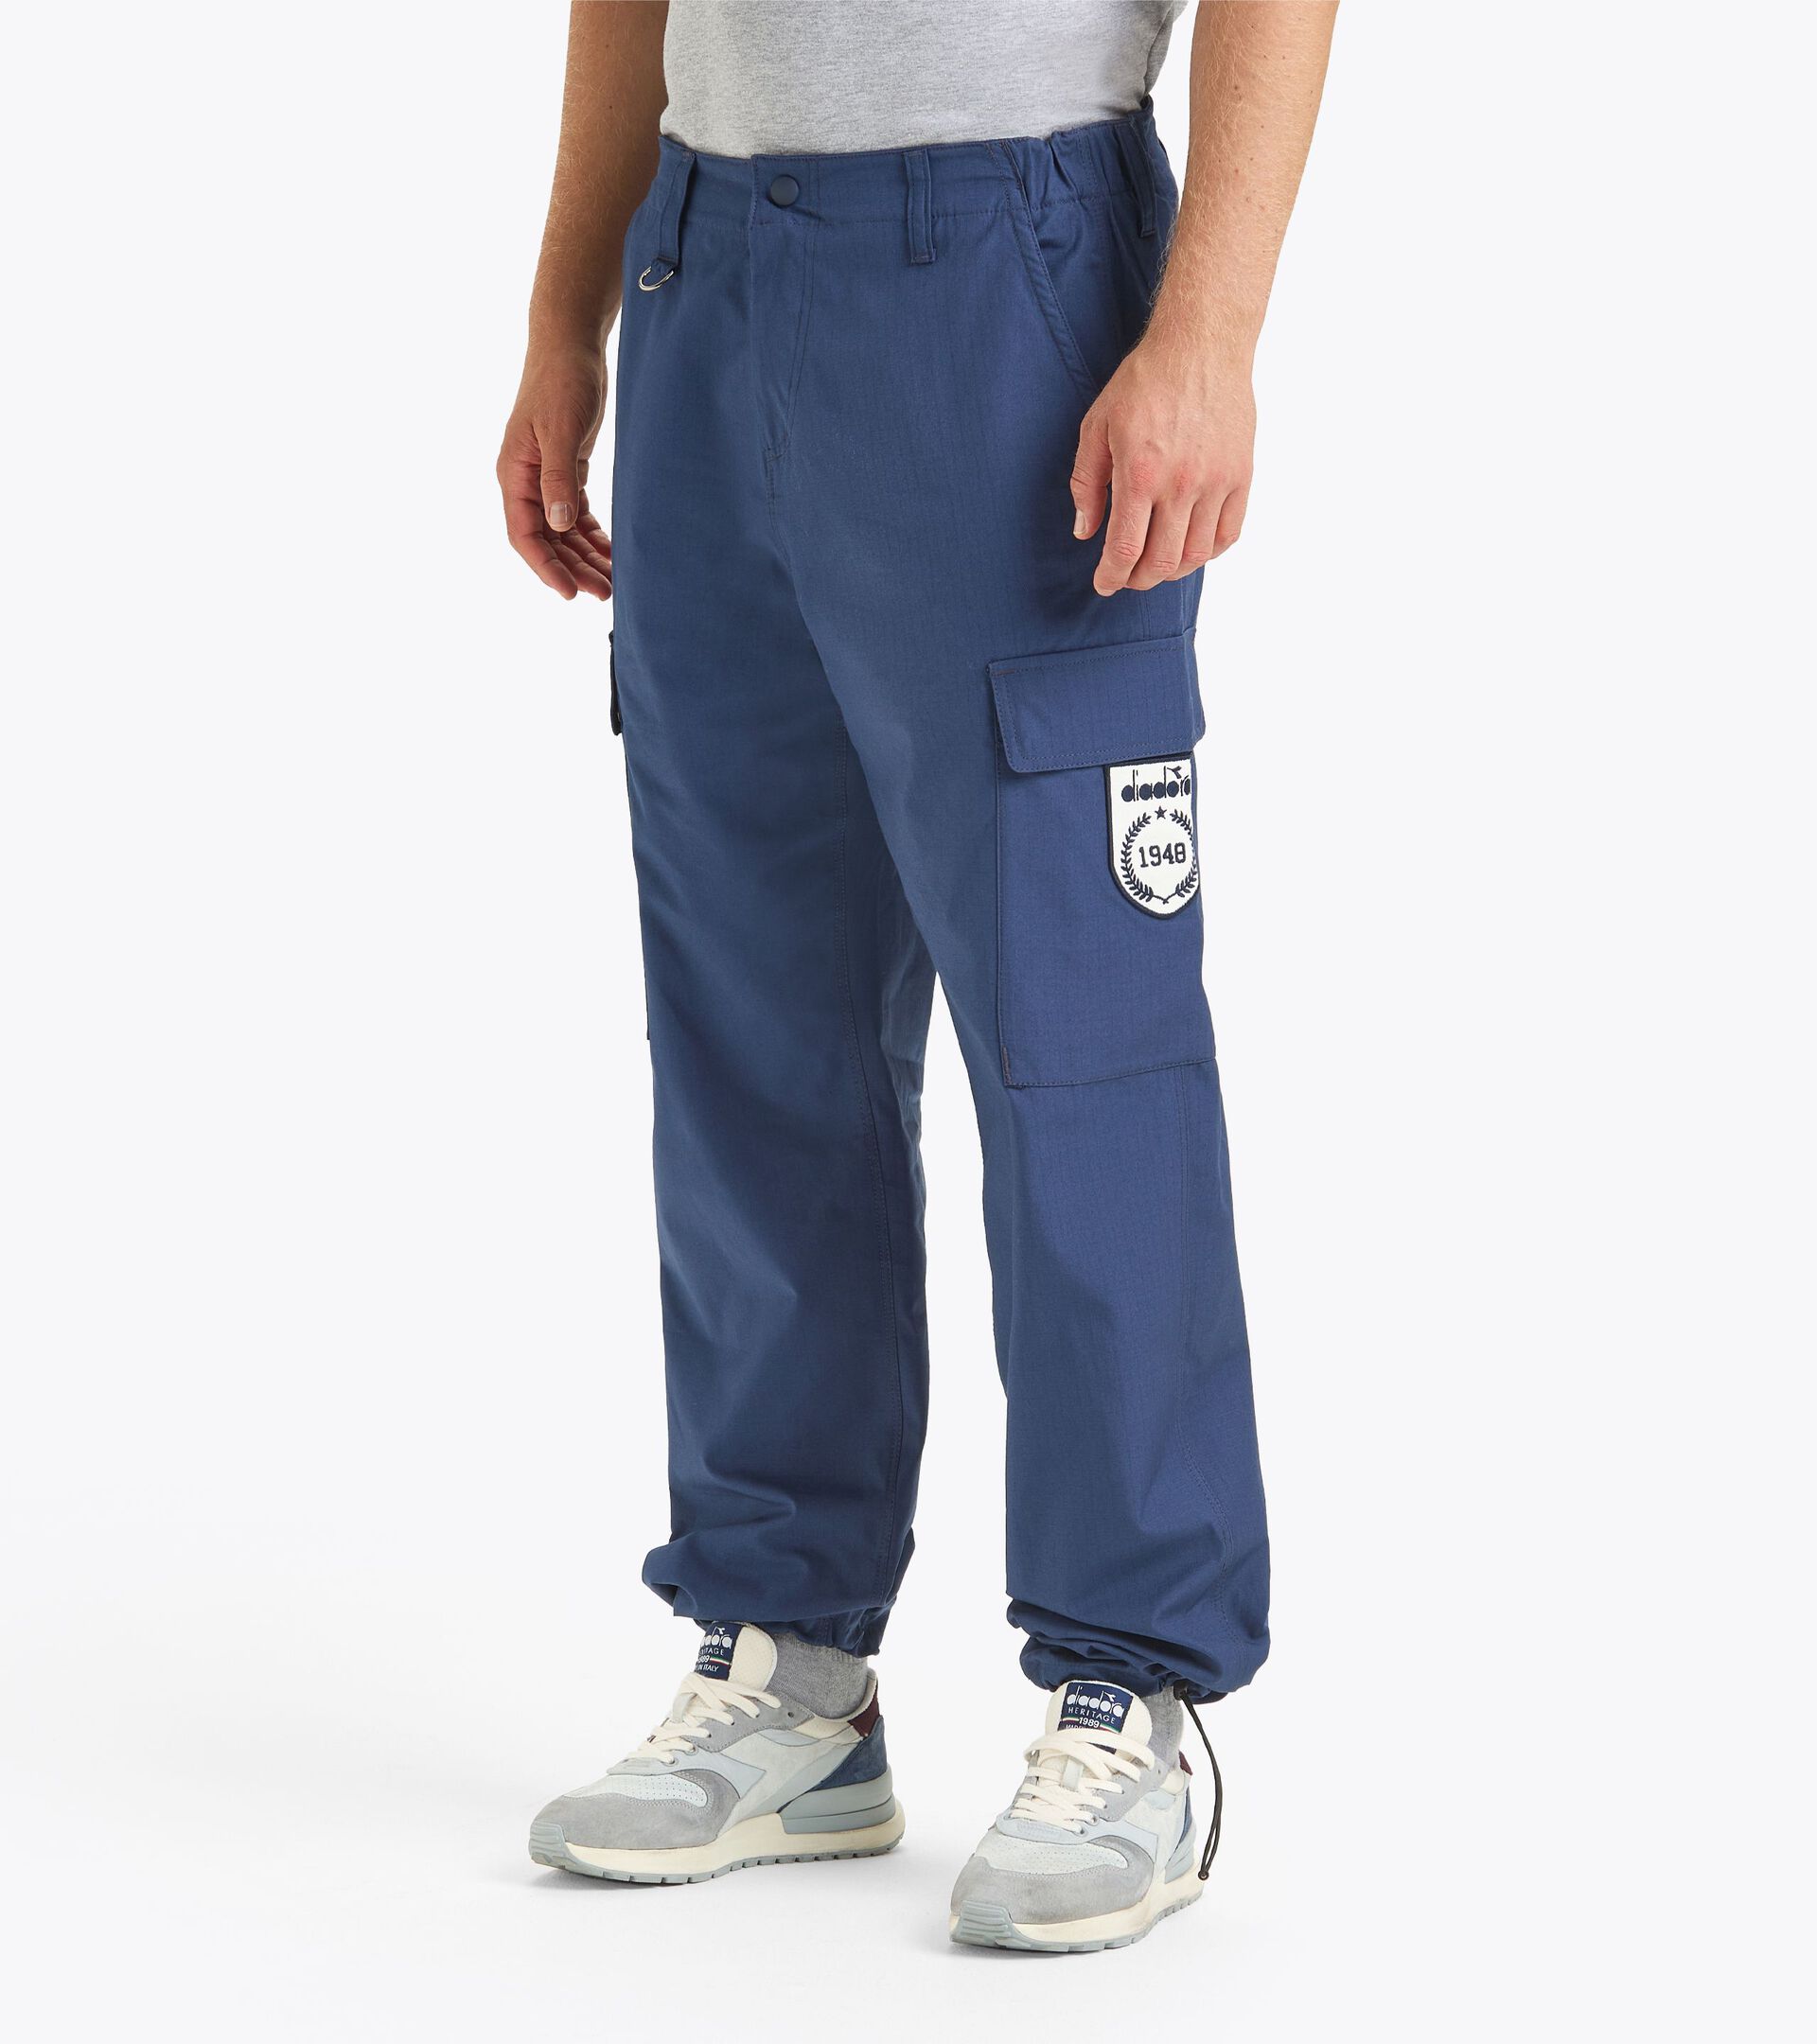 Buy Cargo Pants Women At Sale Prices Online - March 2024